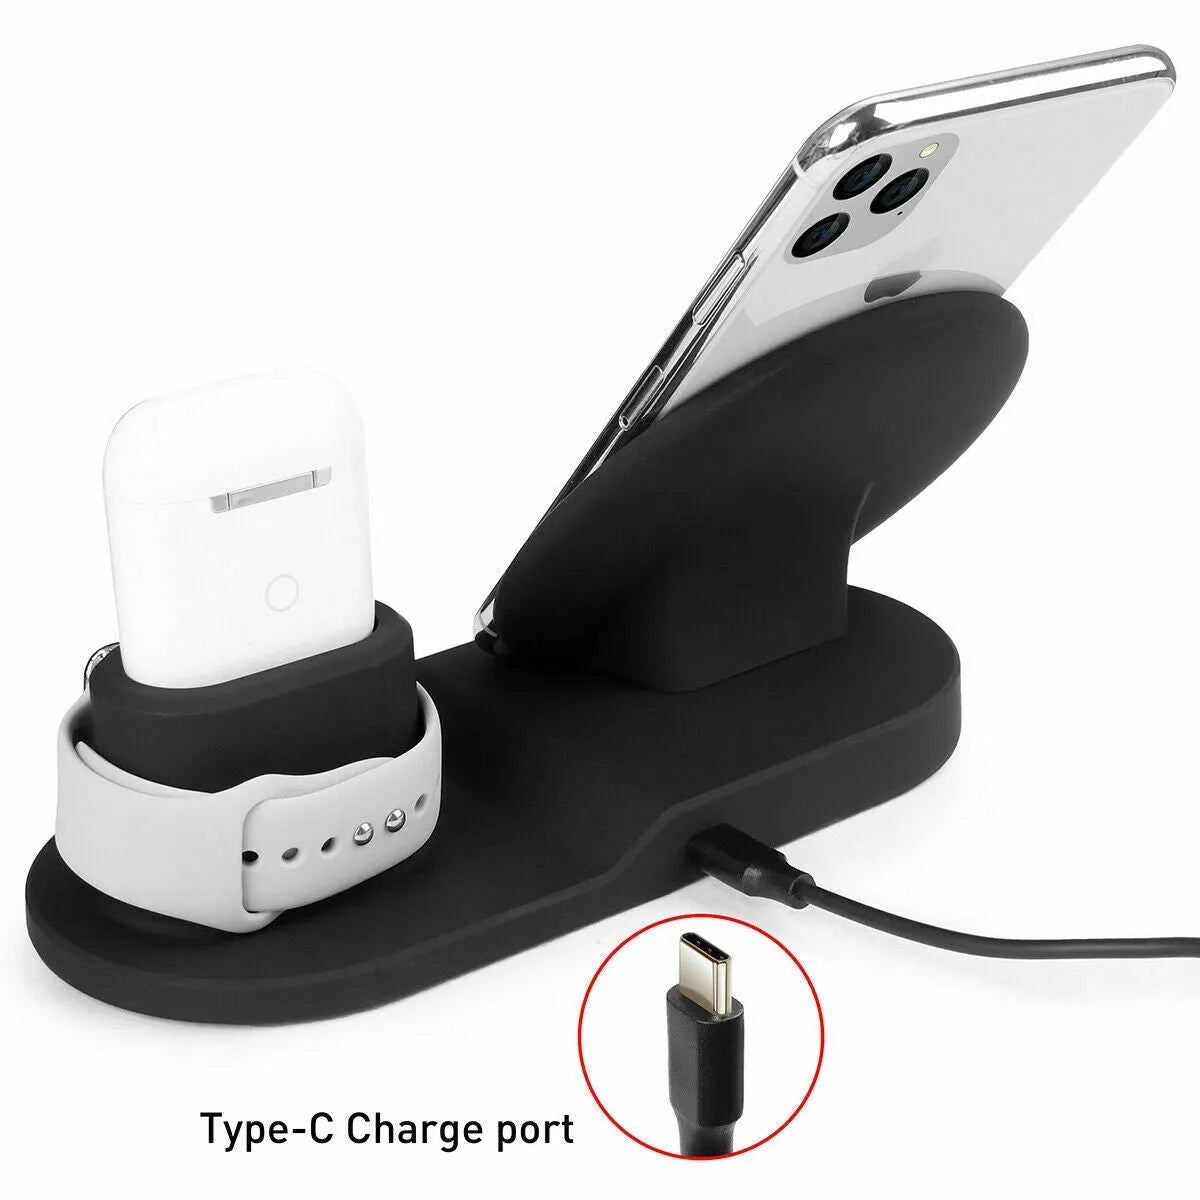 Wireless Fast Charge Stand Dock 3in1 Phone Charging Watch Ear Pods Charger Samsung Galaxy S9+ iPhone XS